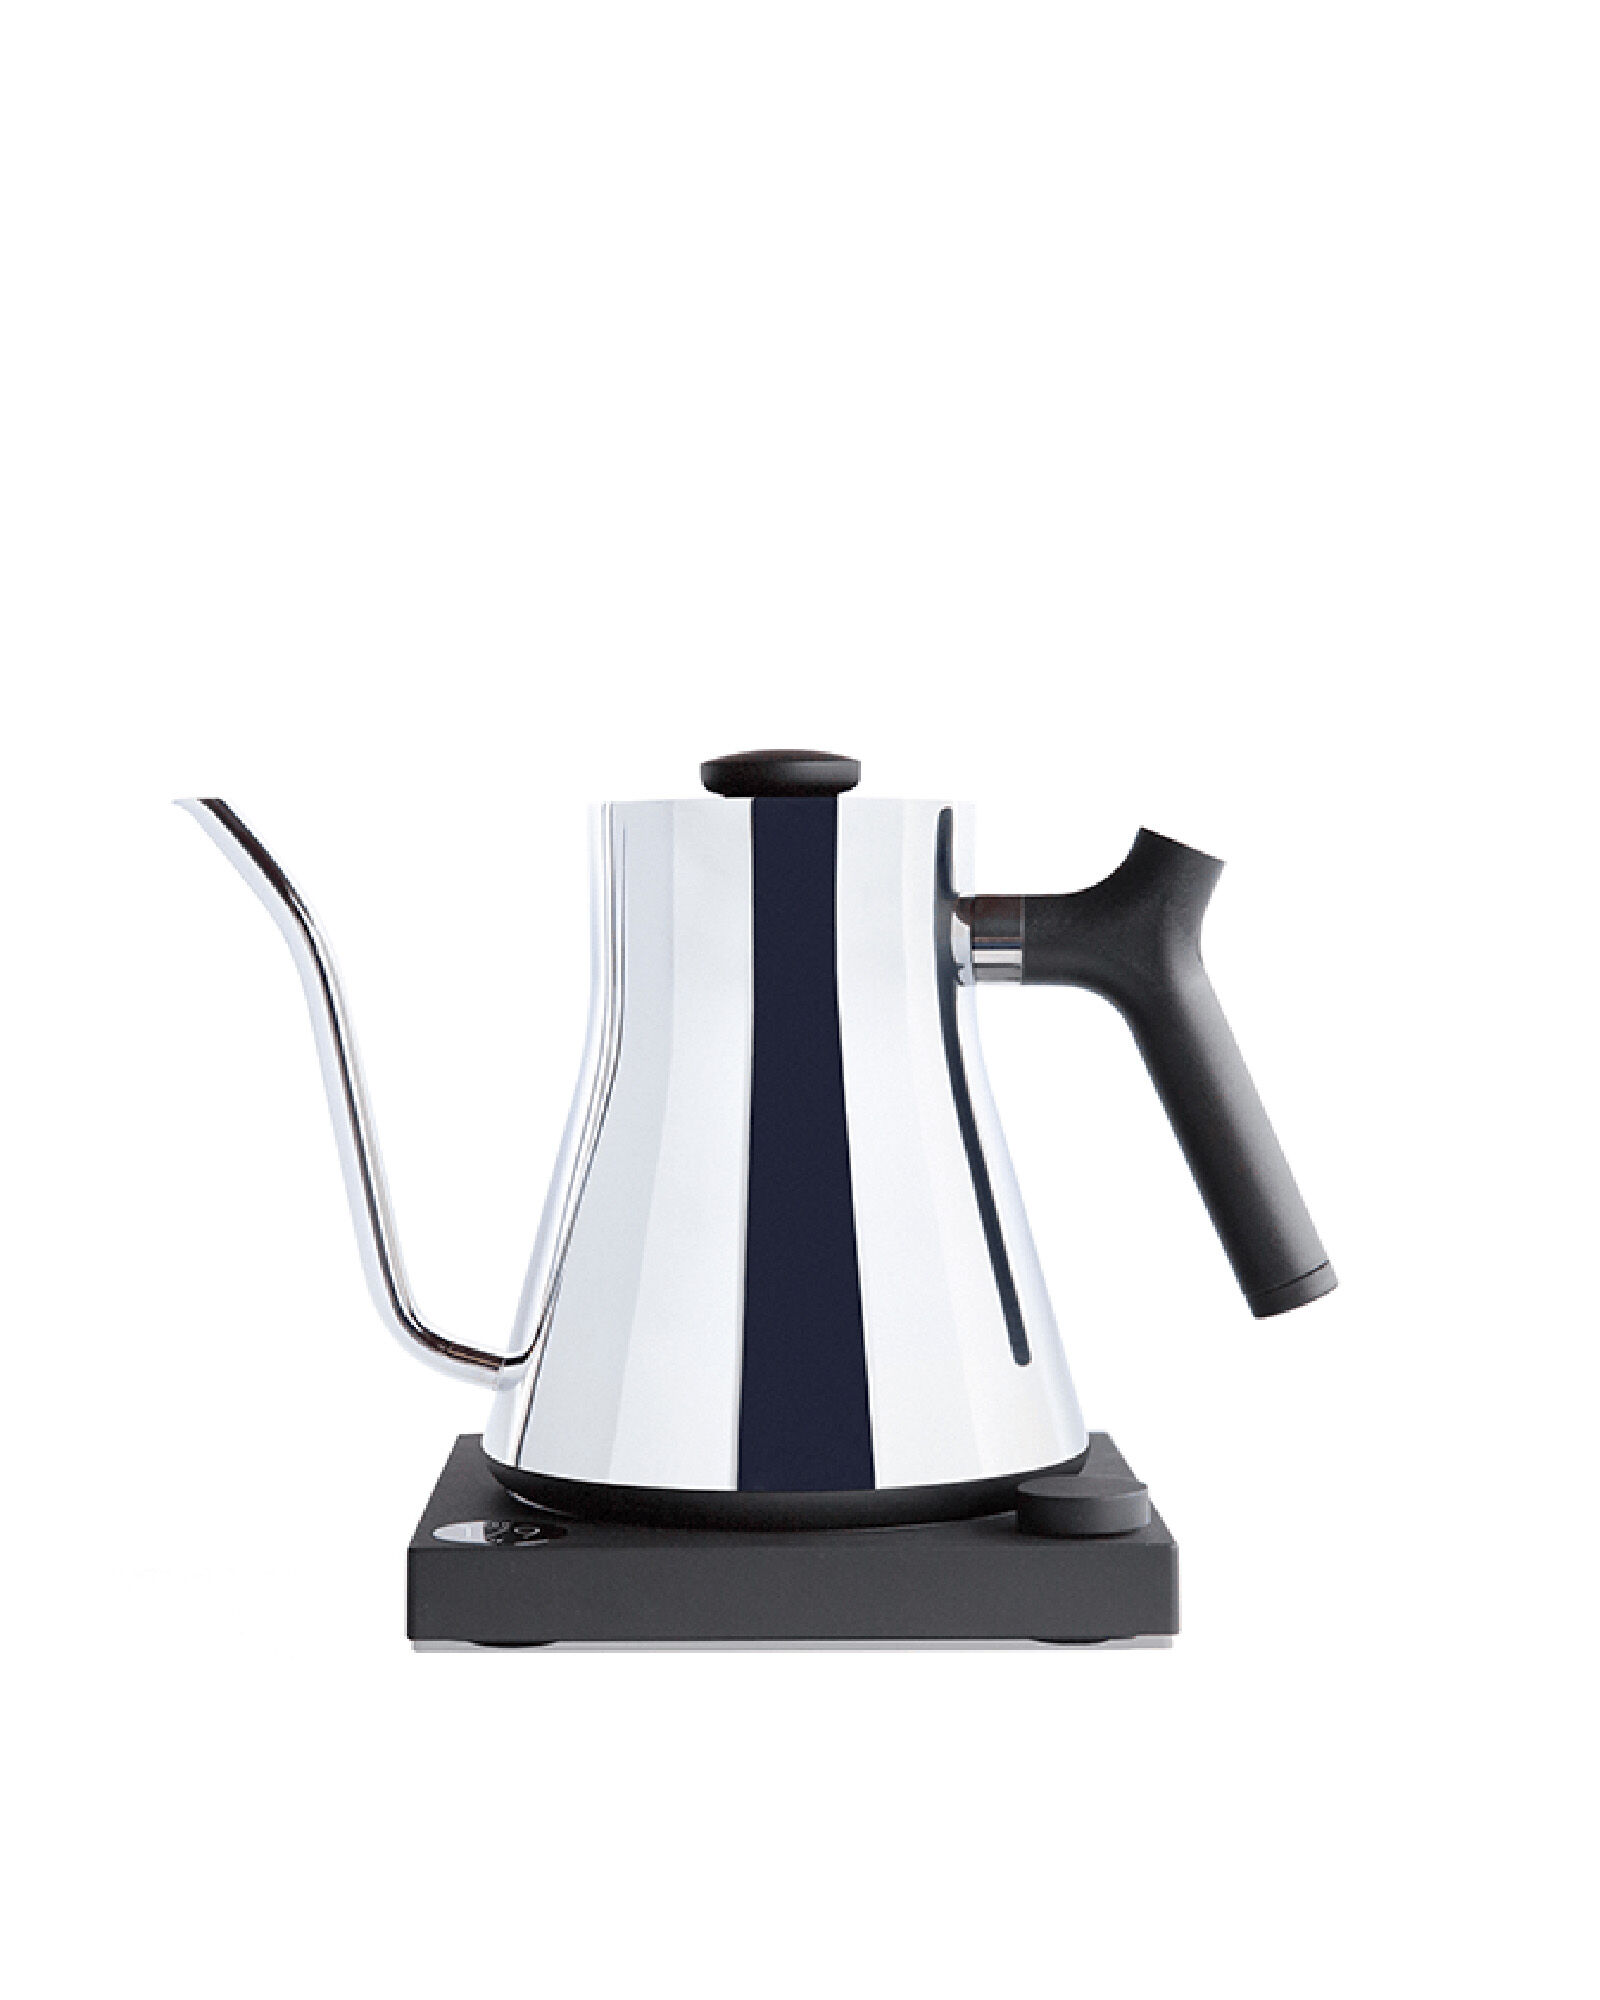 Looking at the Stagg EKG Electric Kettle by Fellow 